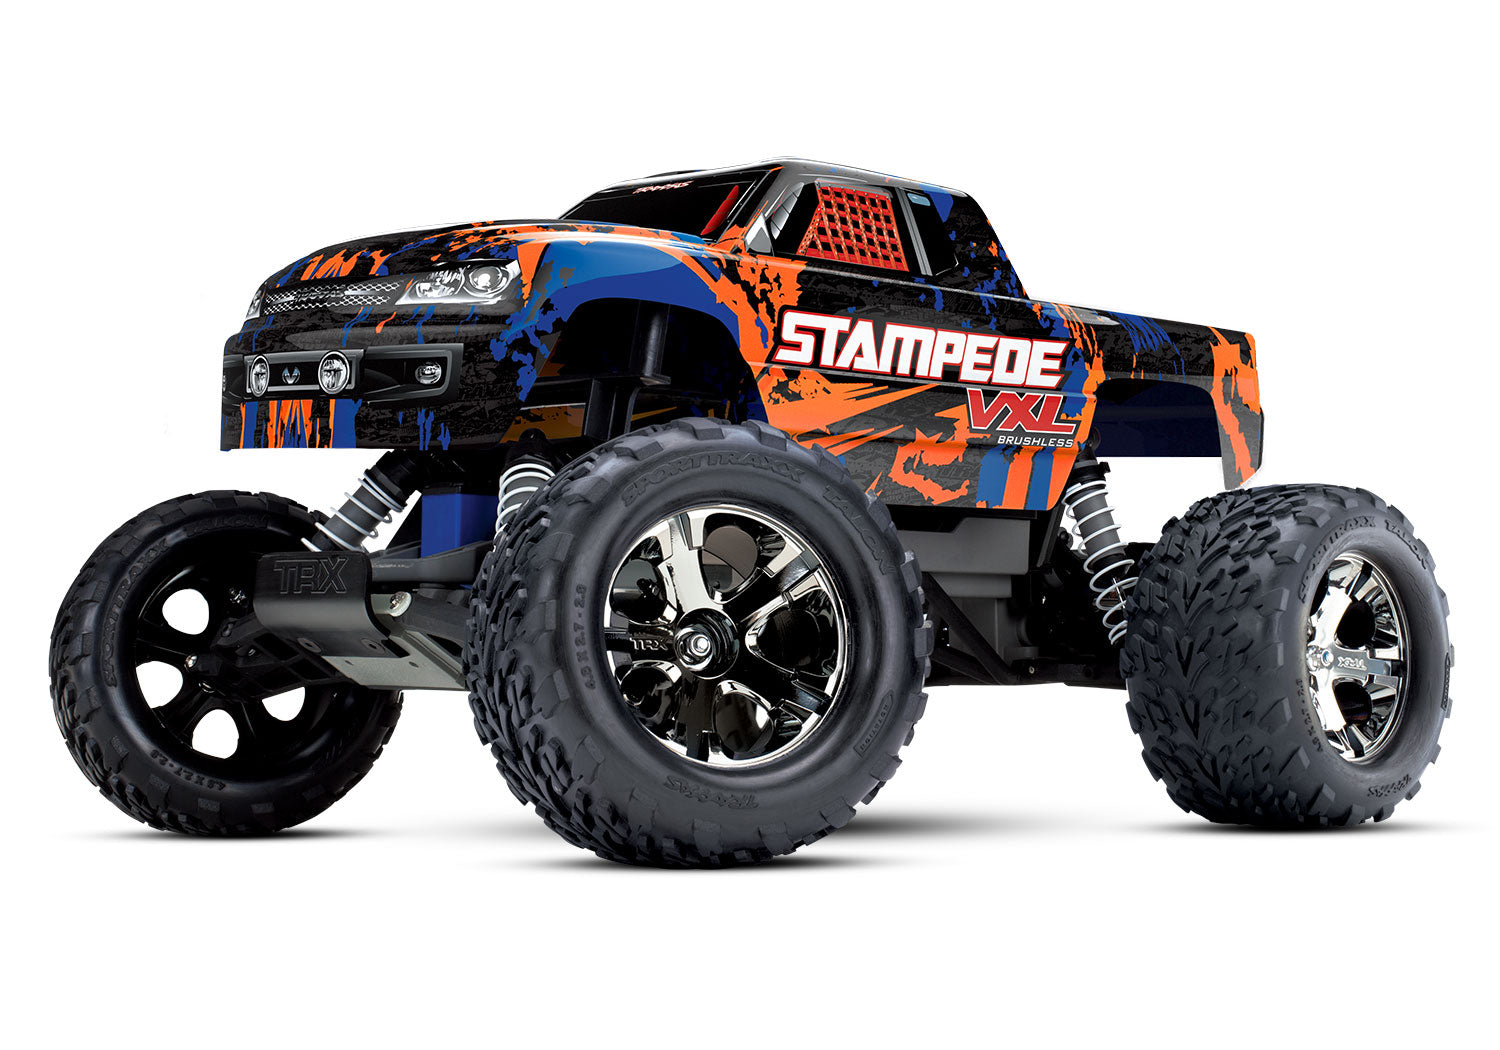 Traxxas Stampede 2wd VXL 1/10 Monster Truck *DISCONTINUED